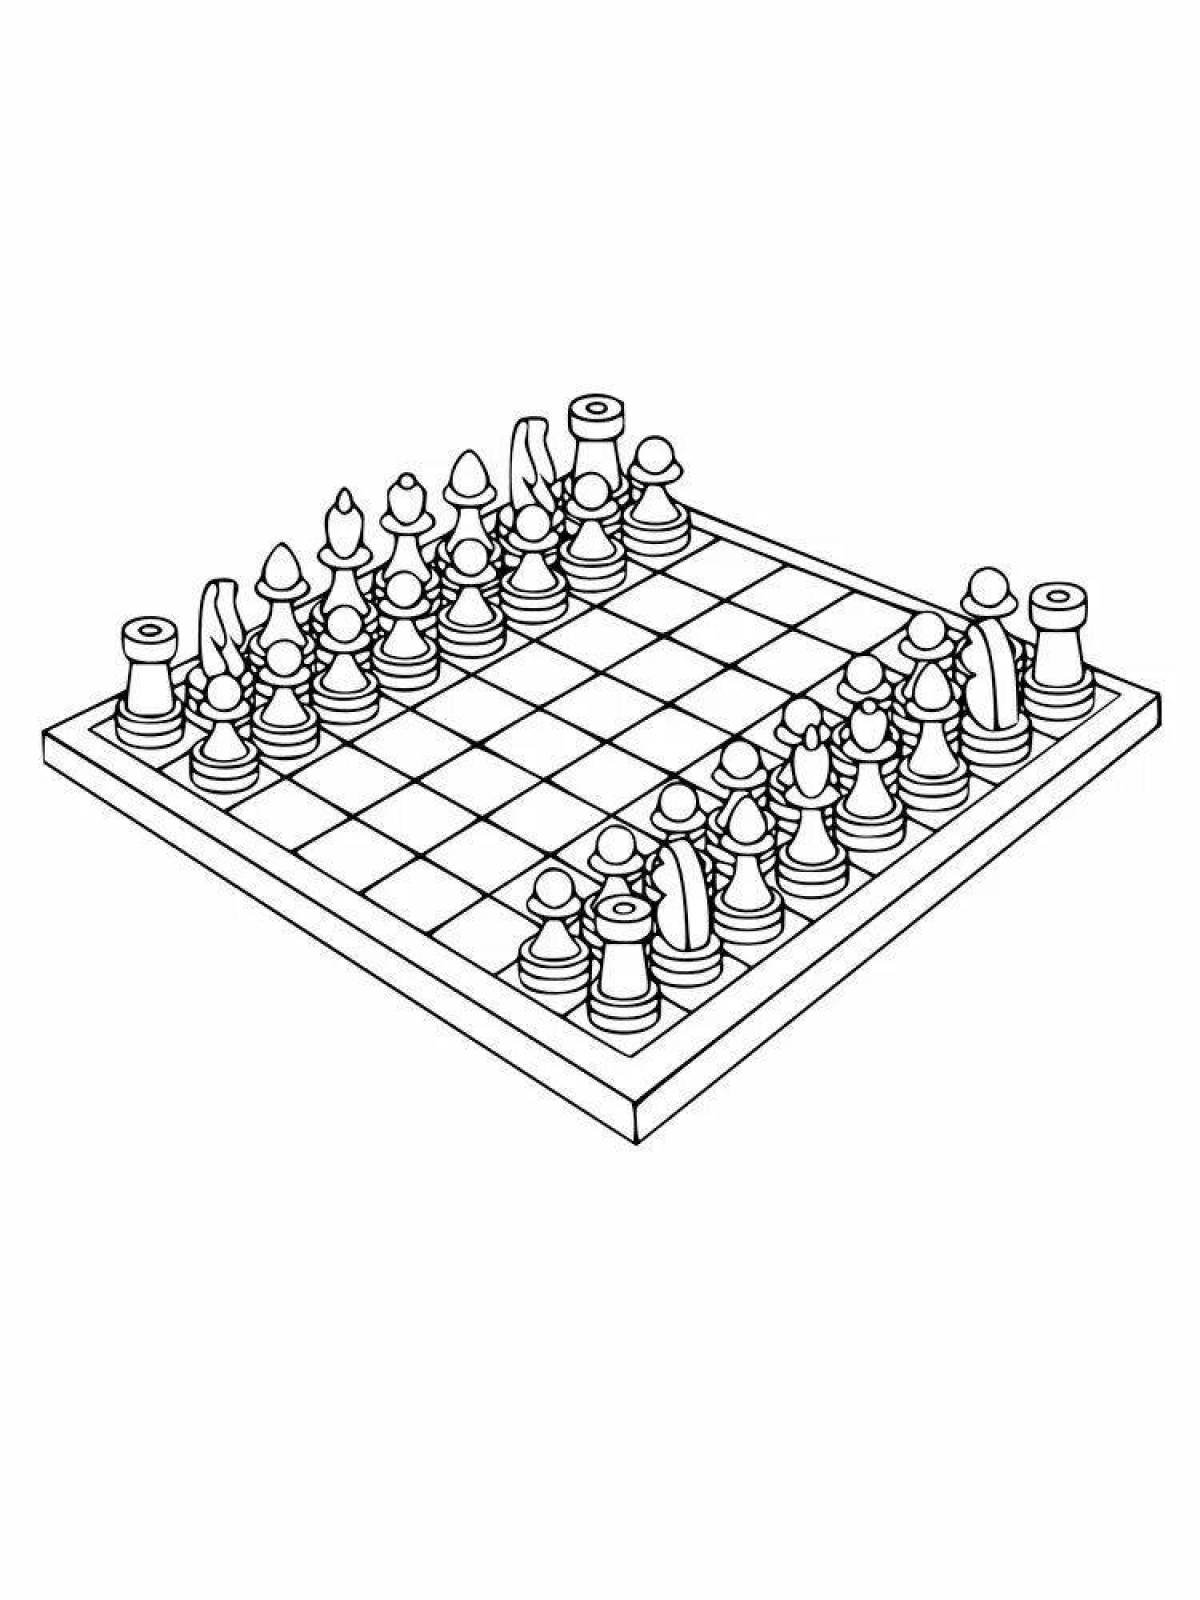 Chess for kids #2